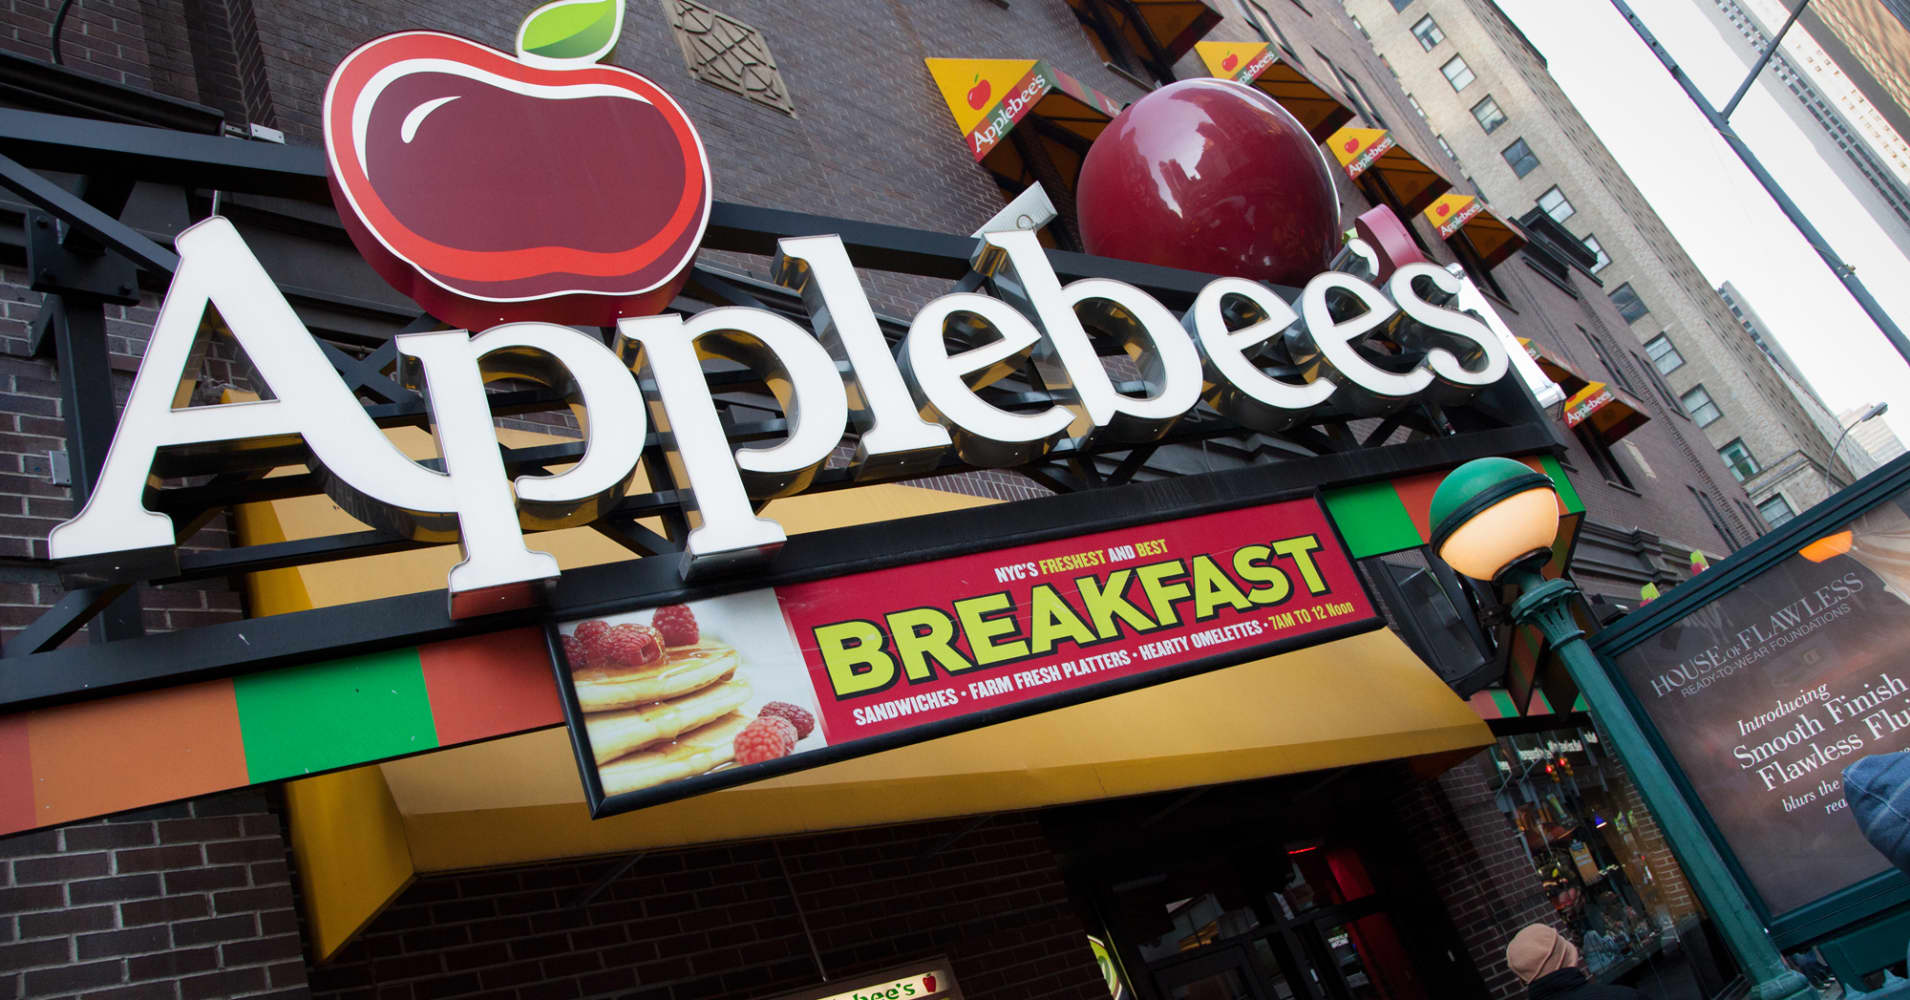 applebee's owner dine brands wants to steal fast-food customers with its deals